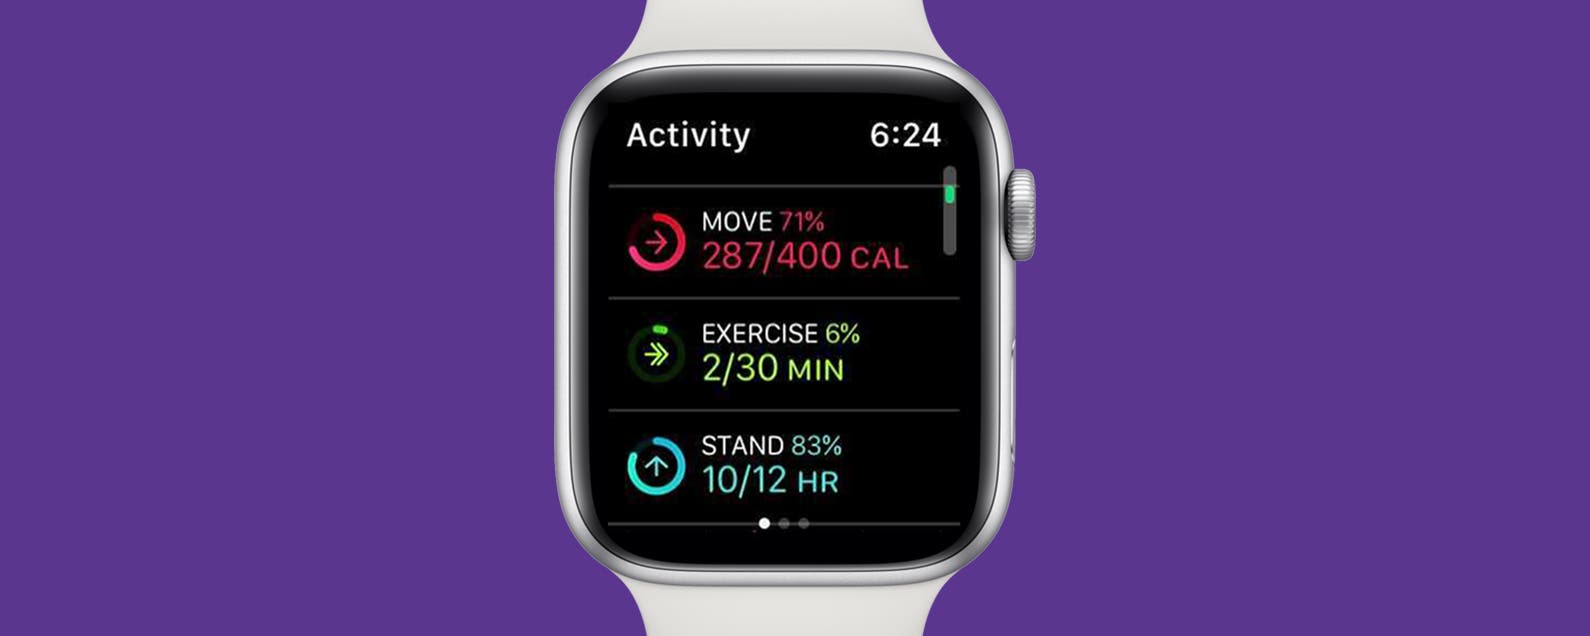 How to Calculate BMR with Apple Watch 1